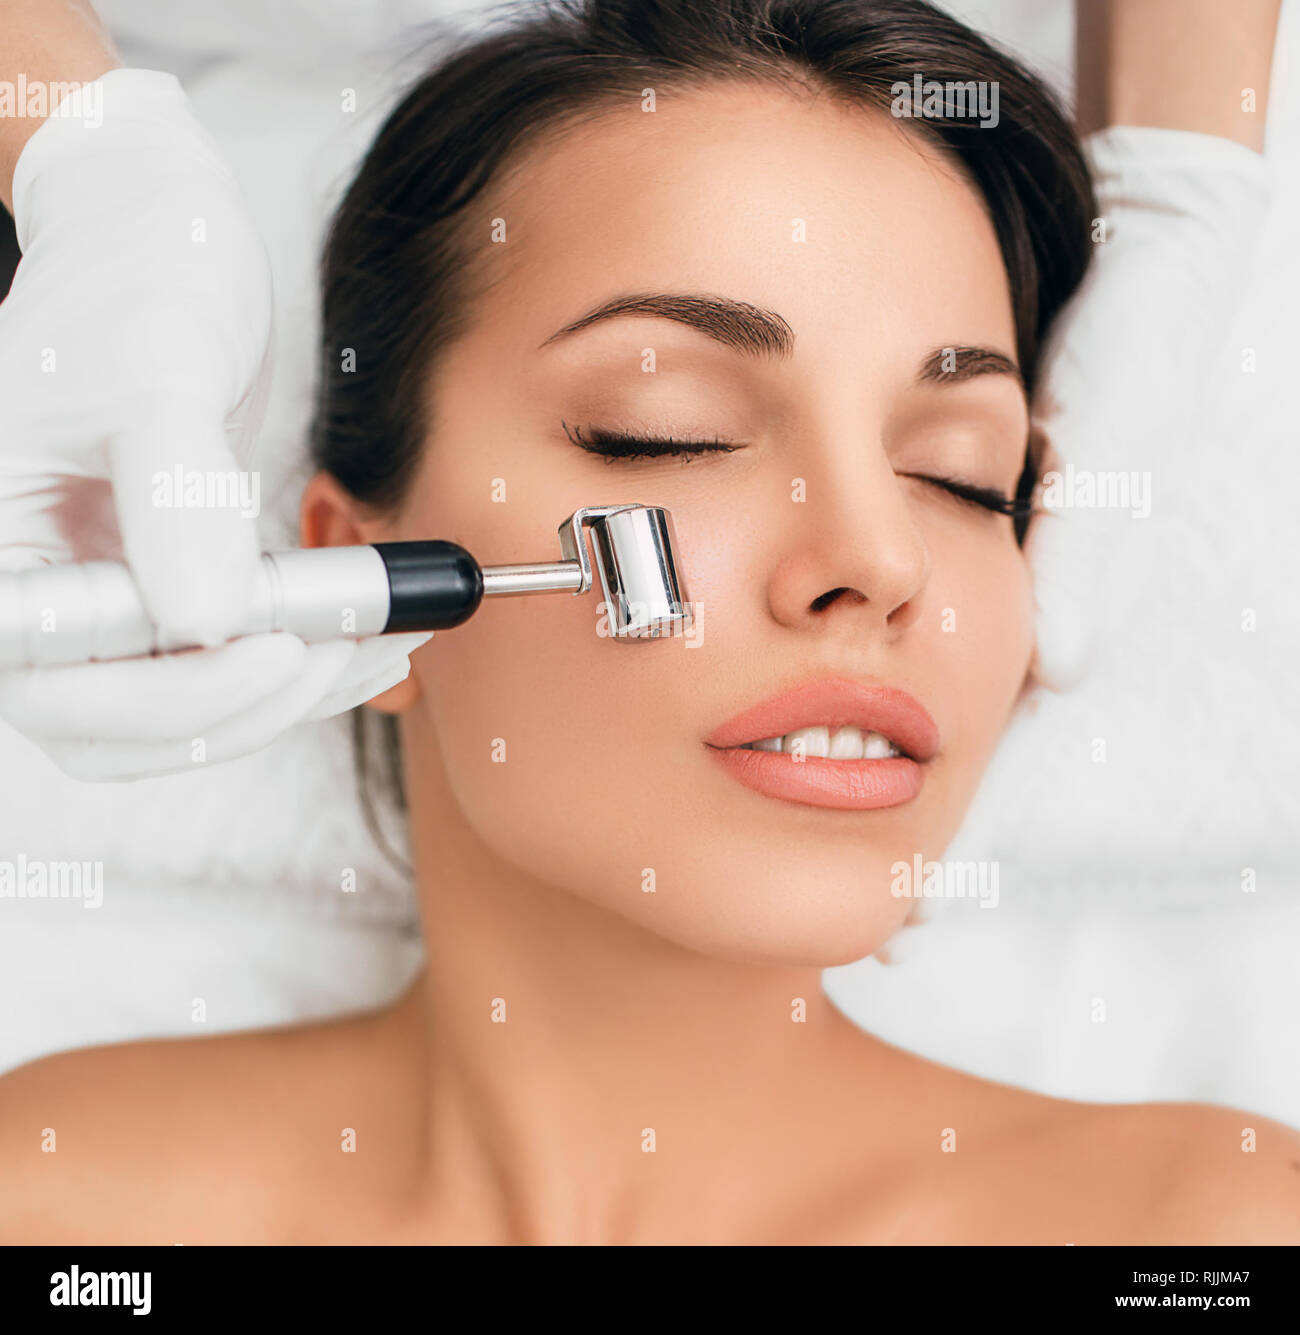 Woman getting procedure facial rejuvenation and lifting with mesotherapy roller Stock Photo